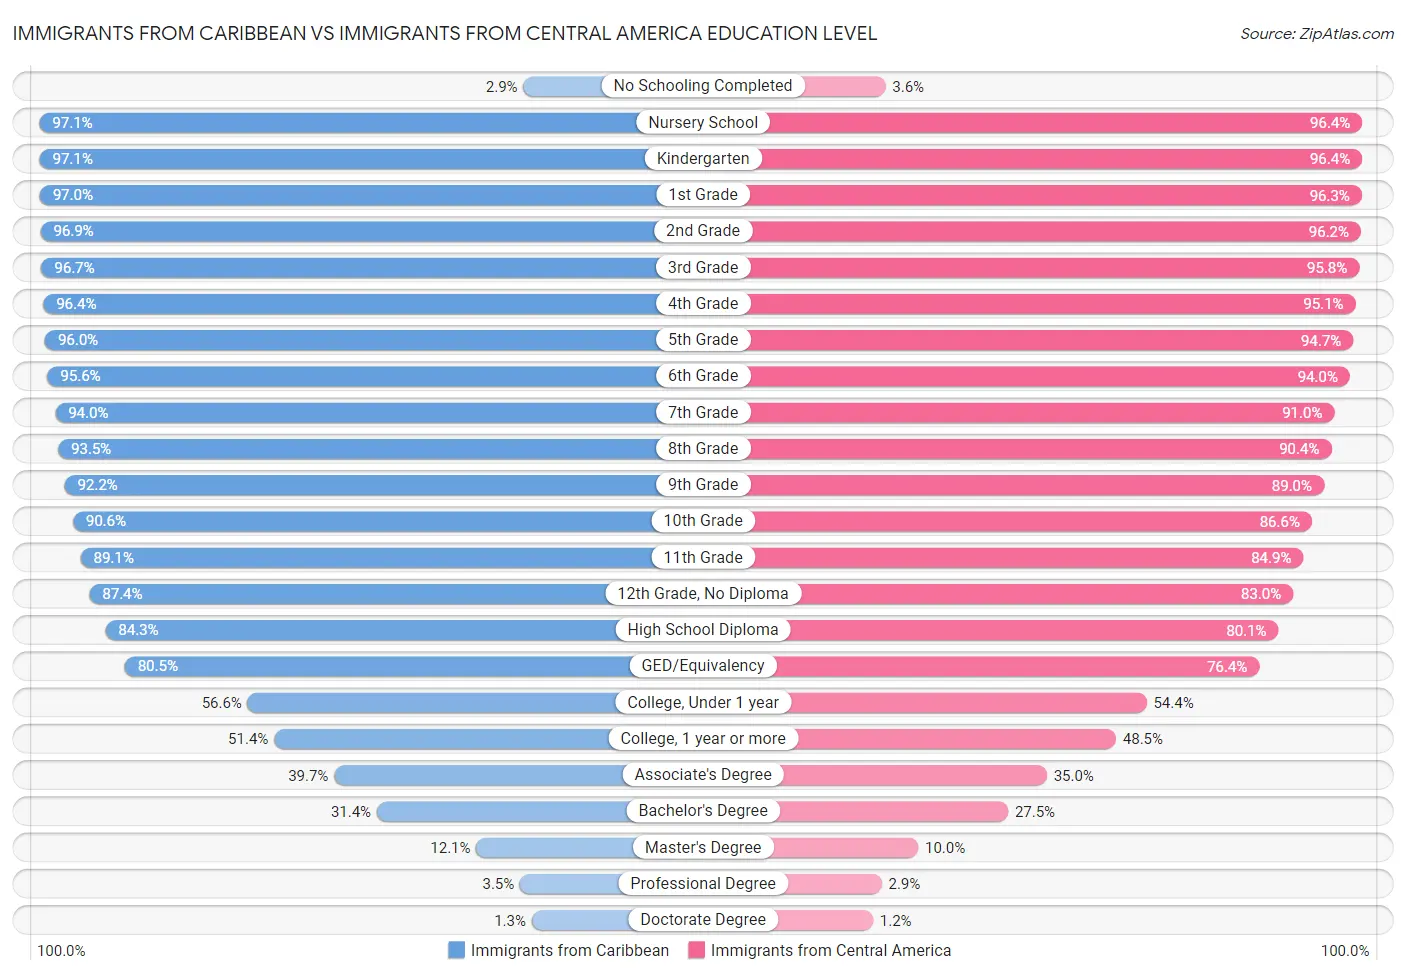 Immigrants from Caribbean vs Immigrants from Central America Education Level